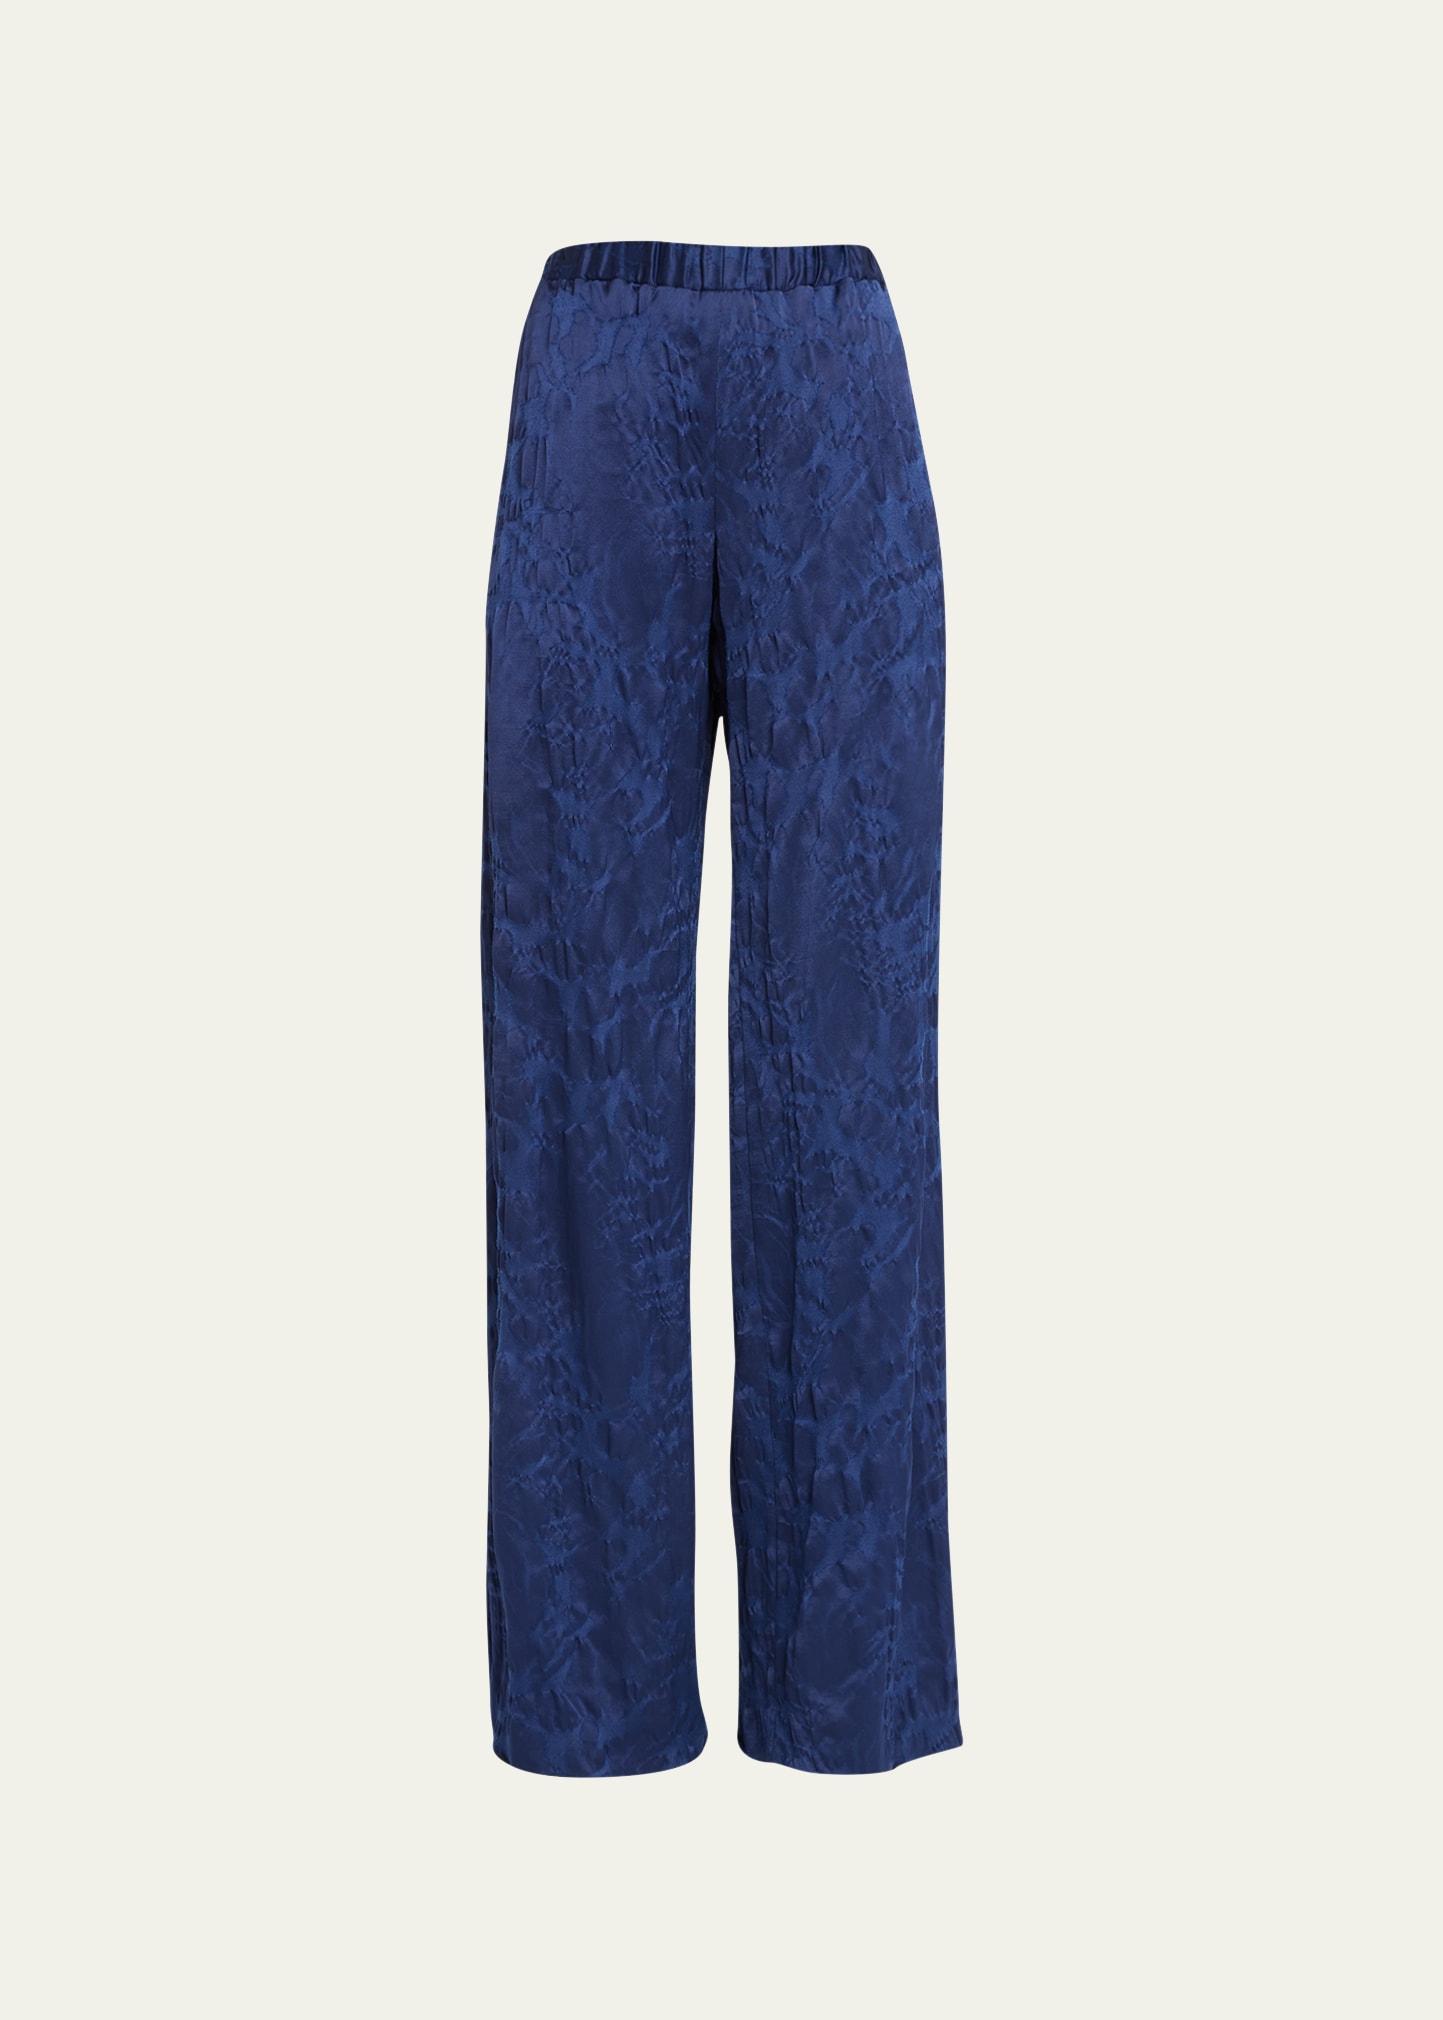 Jason Wu Collection Floral Cloque Jacquard Drawstring Pants In Bright Navy